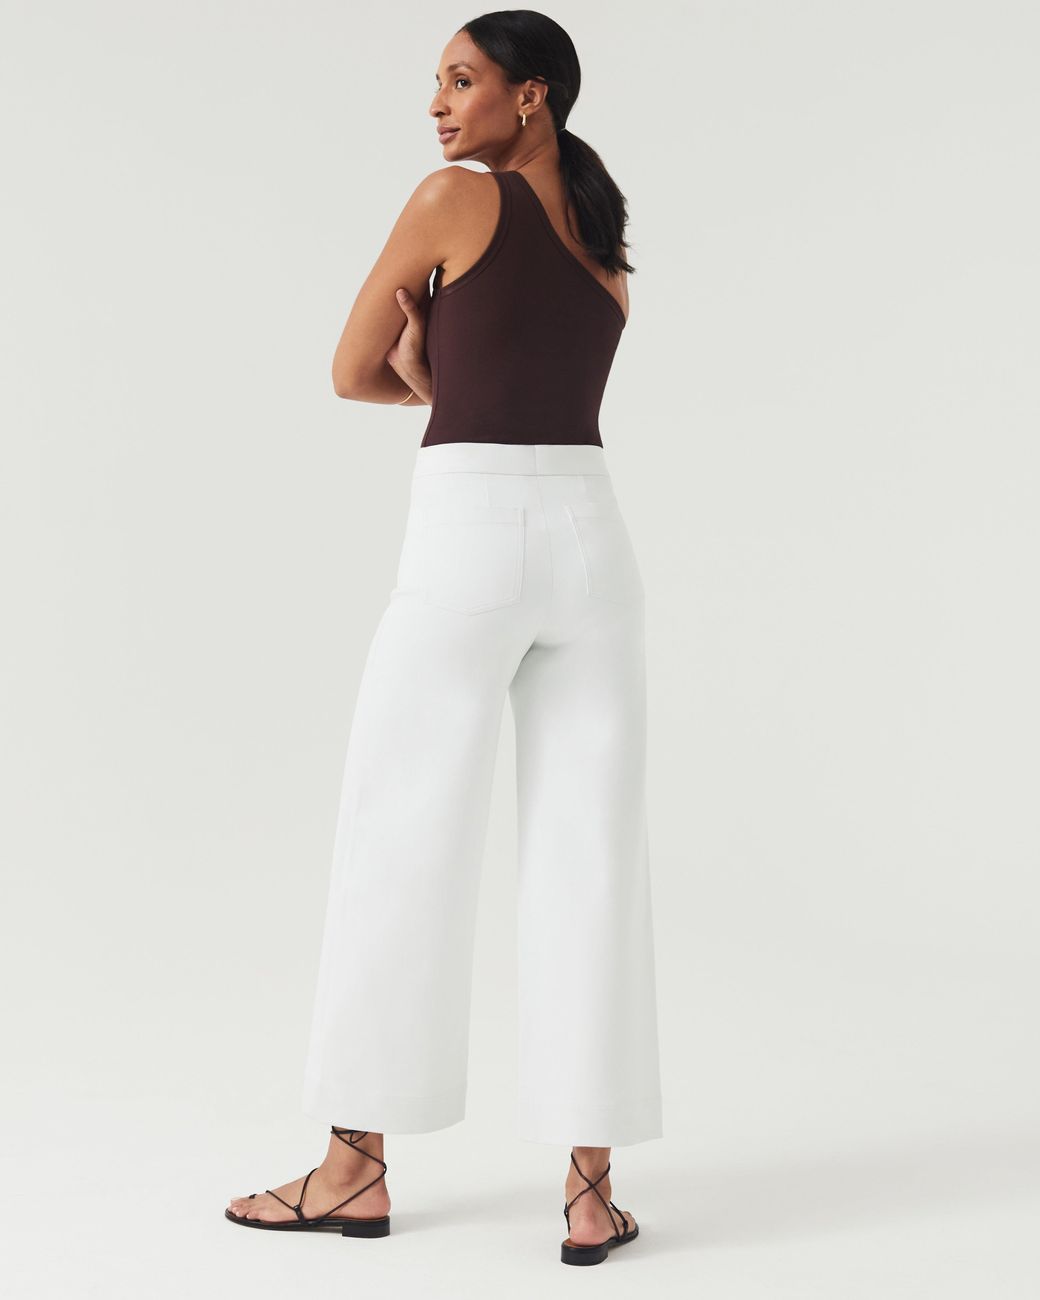 https://cdna.lystit.com/1040/1300/n/photos/spanx/07e7564e/spanx-Classic-White-On-the-go-Wide-Leg-Pant-With-Ultimate-Opacity-Technology.jpeg